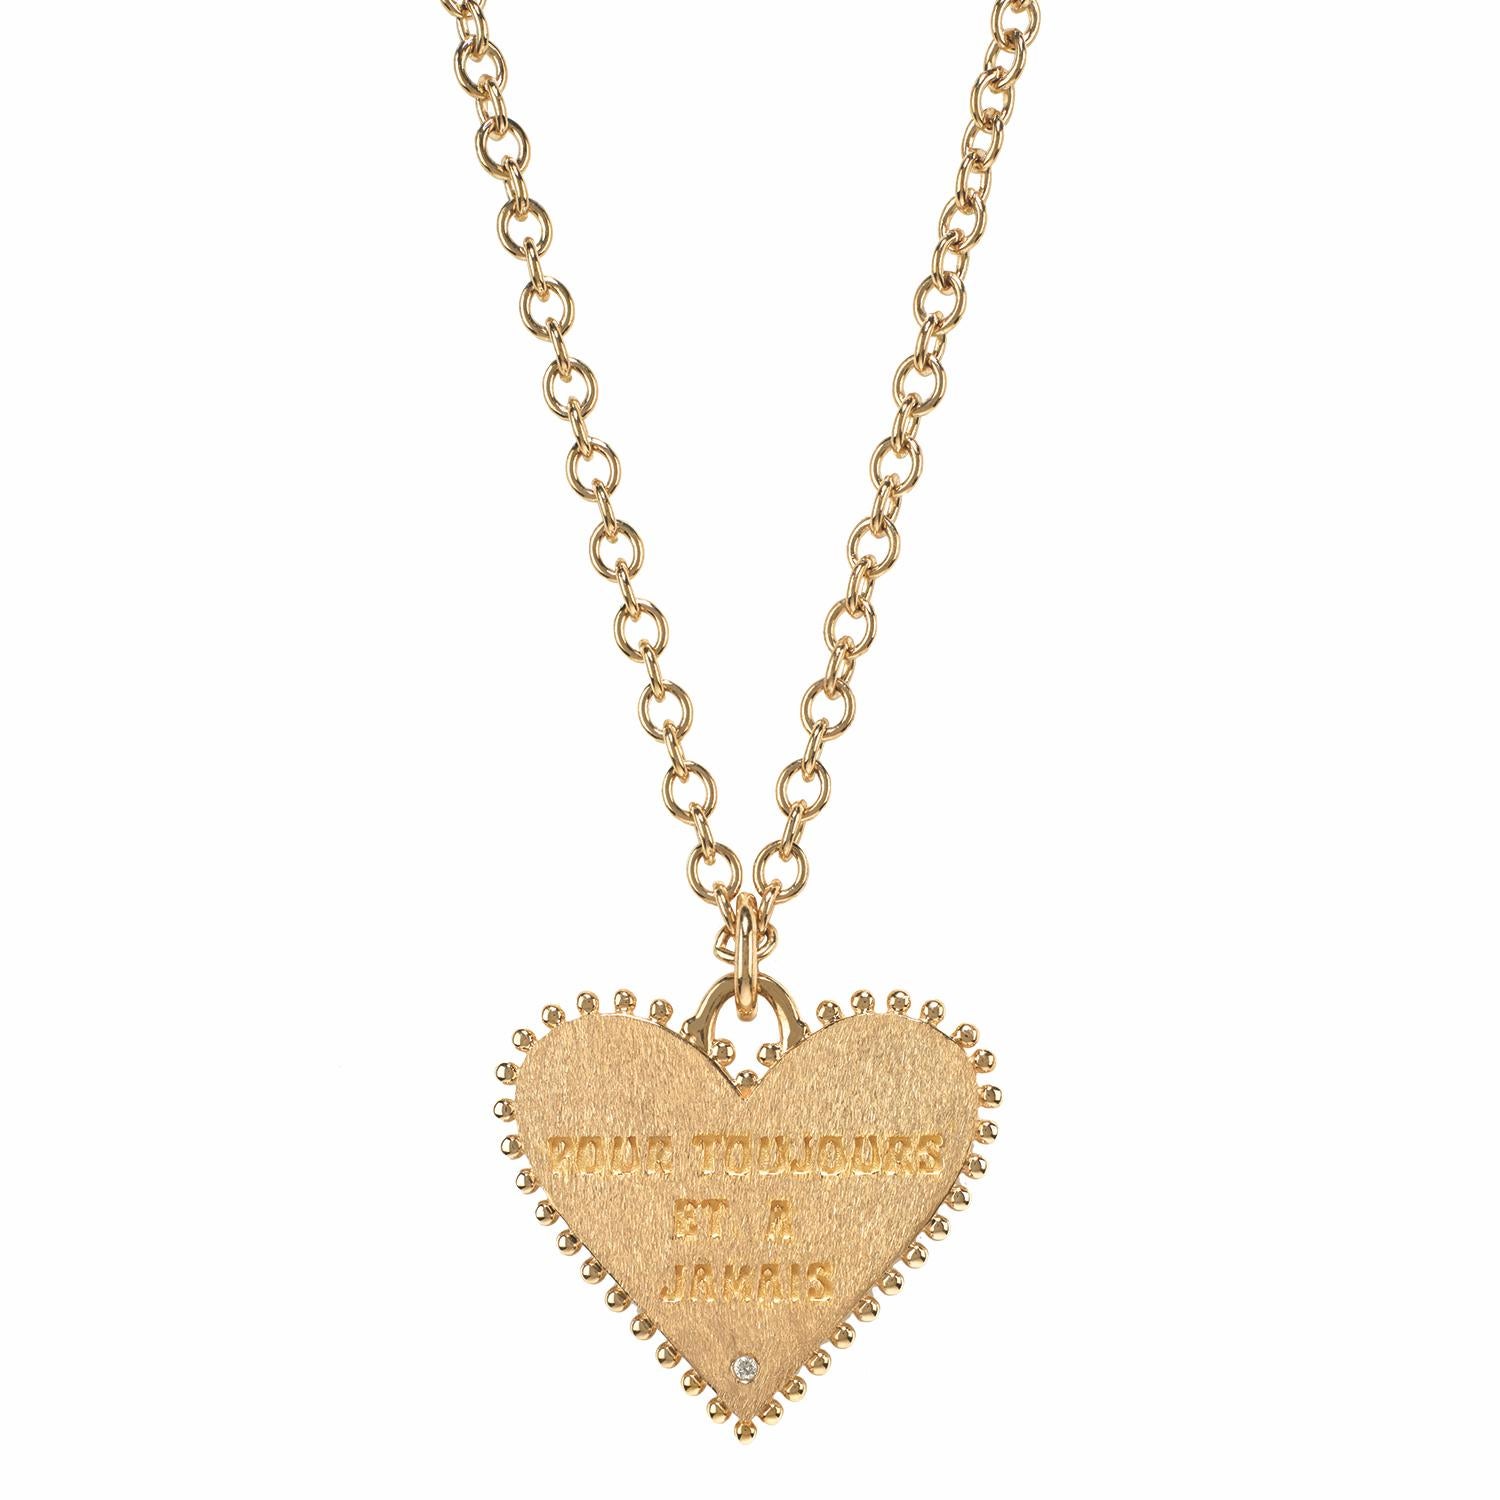 This lovely 14 karat yellow gold two sided Marlo Laz heart charm coin reads on its back 